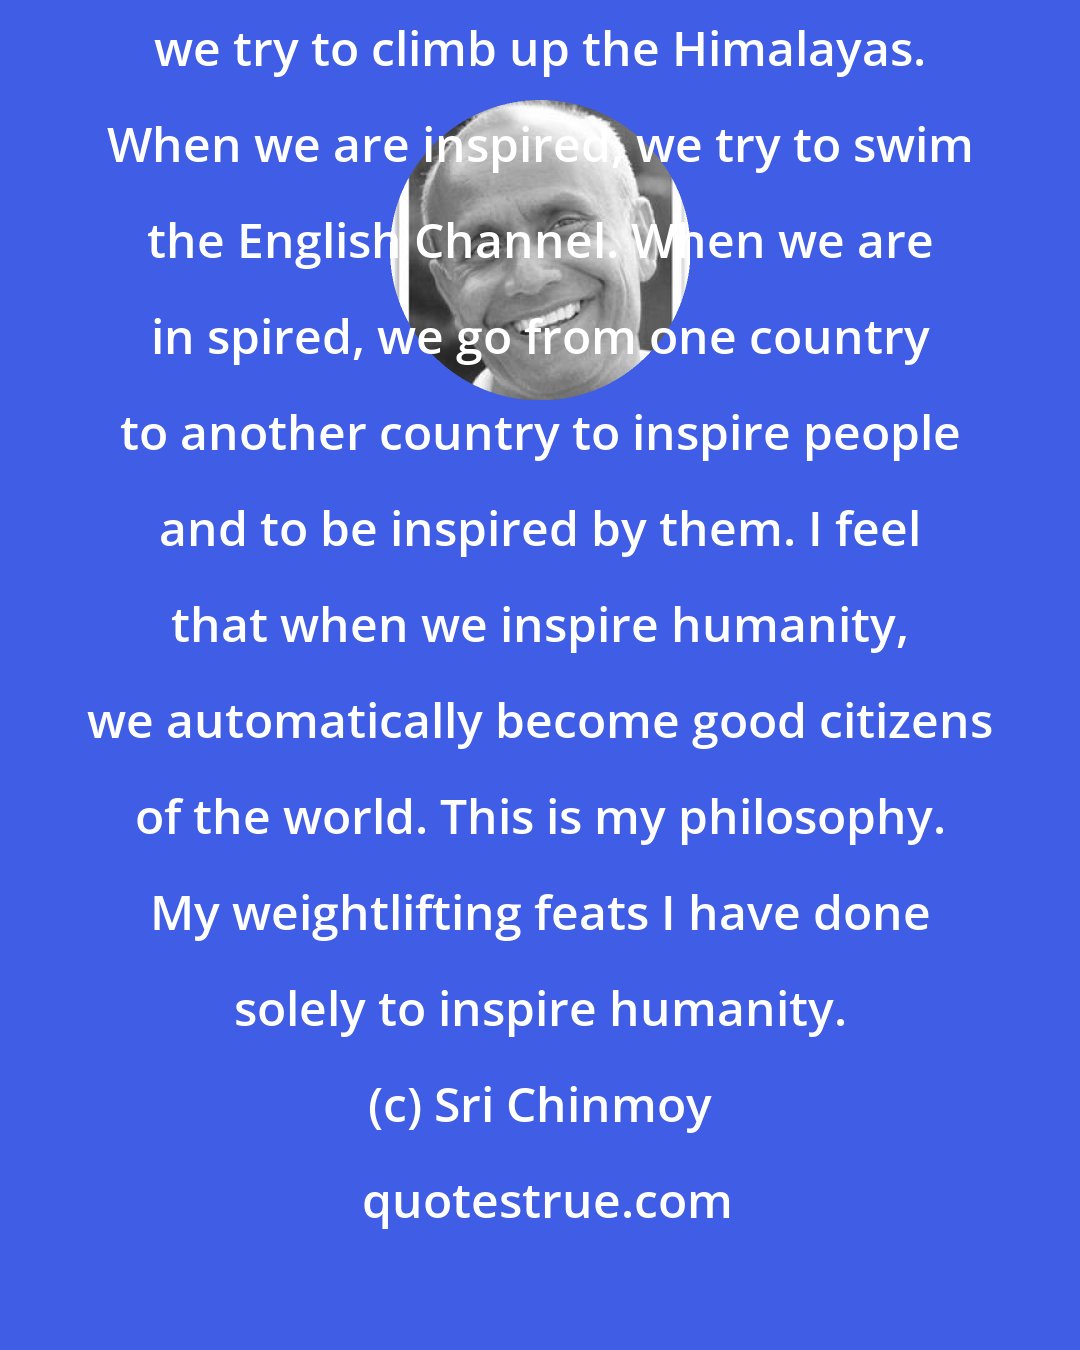 Sri Chinmoy: Inspiration is a divine element inside our life. When we are inspired, we try to climb up the Himalayas. When we are inspired, we try to swim the English Channel. When we are in spired, we go from one country to another country to inspire people and to be inspired by them. I feel that when we inspire humanity, we automatically become good citizens of the world. This is my philosophy. My weightlifting feats I have done solely to inspire humanity.